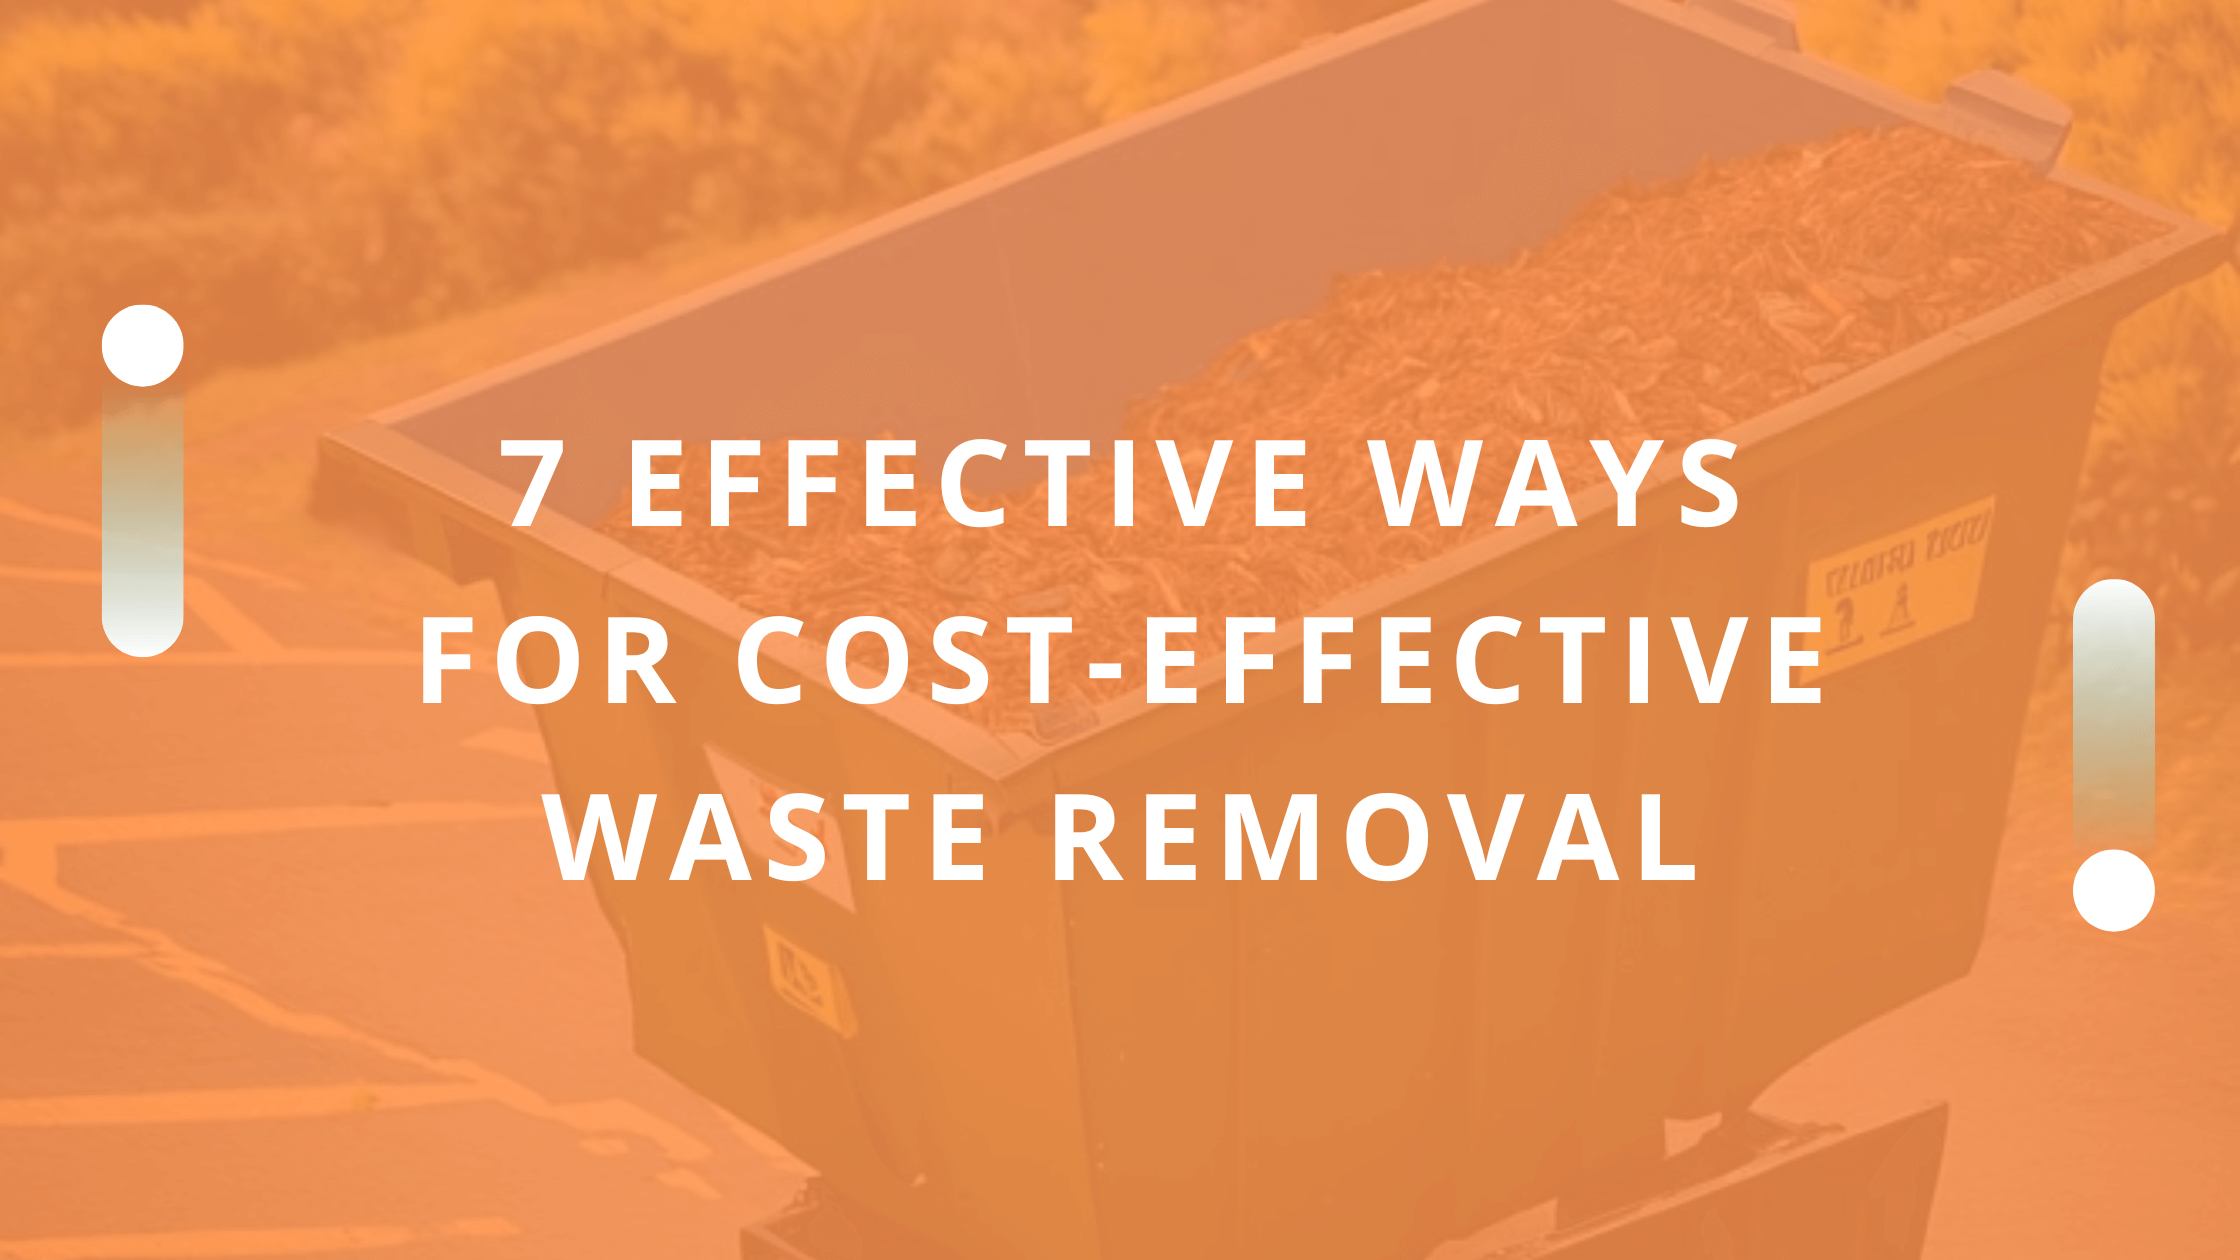 7 effective ways for effective waste removal